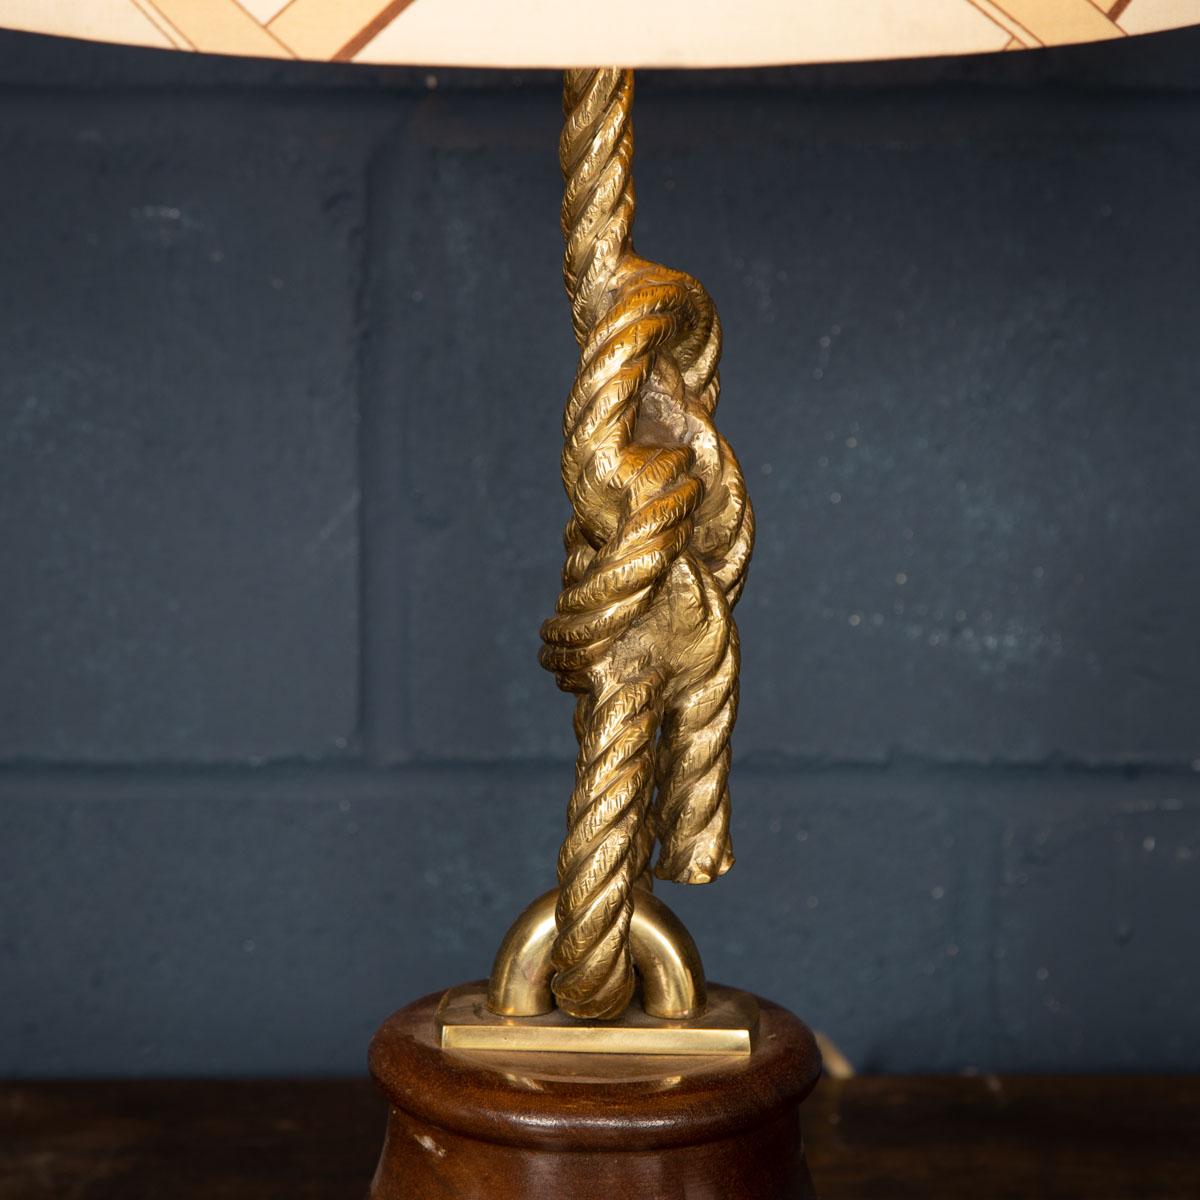 20th Century Large Table Lamp with Original Shade Attributable to Gucci, c.1980 For Sale 11